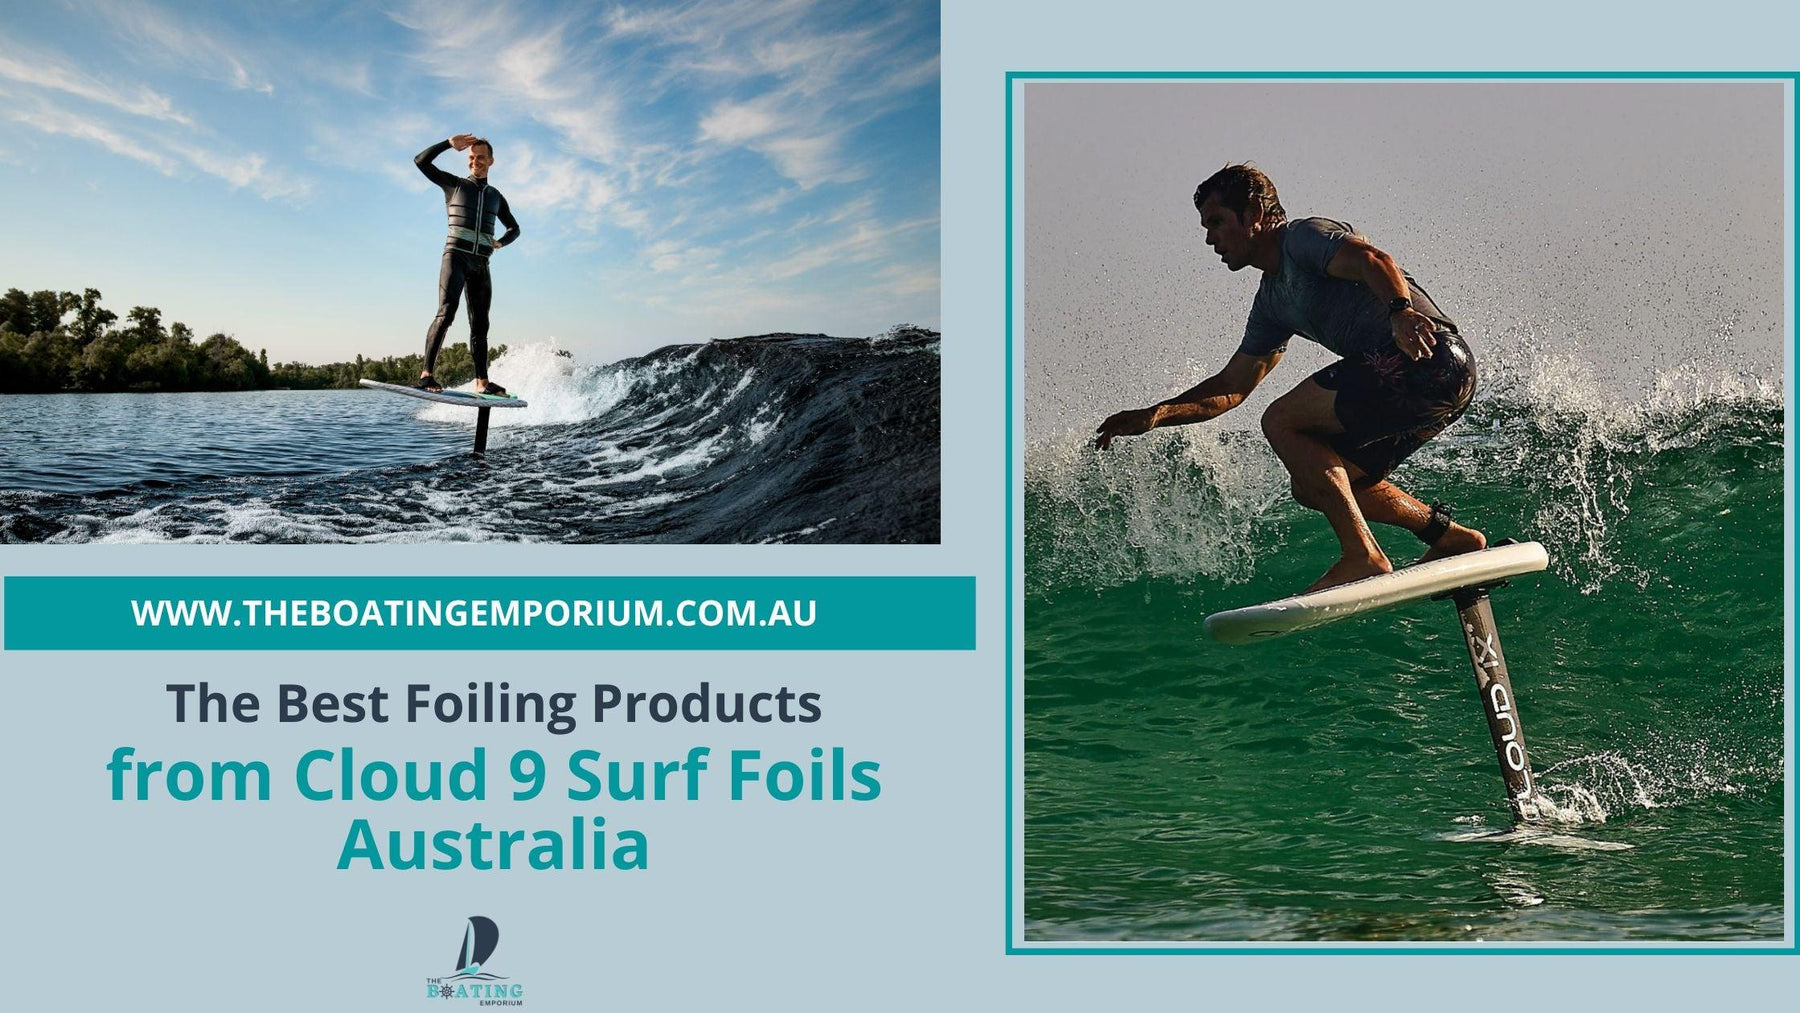 The Best Foil Kits and Foiling Products from Cloud 9 Surf Foils Australia - The Boating Emporium